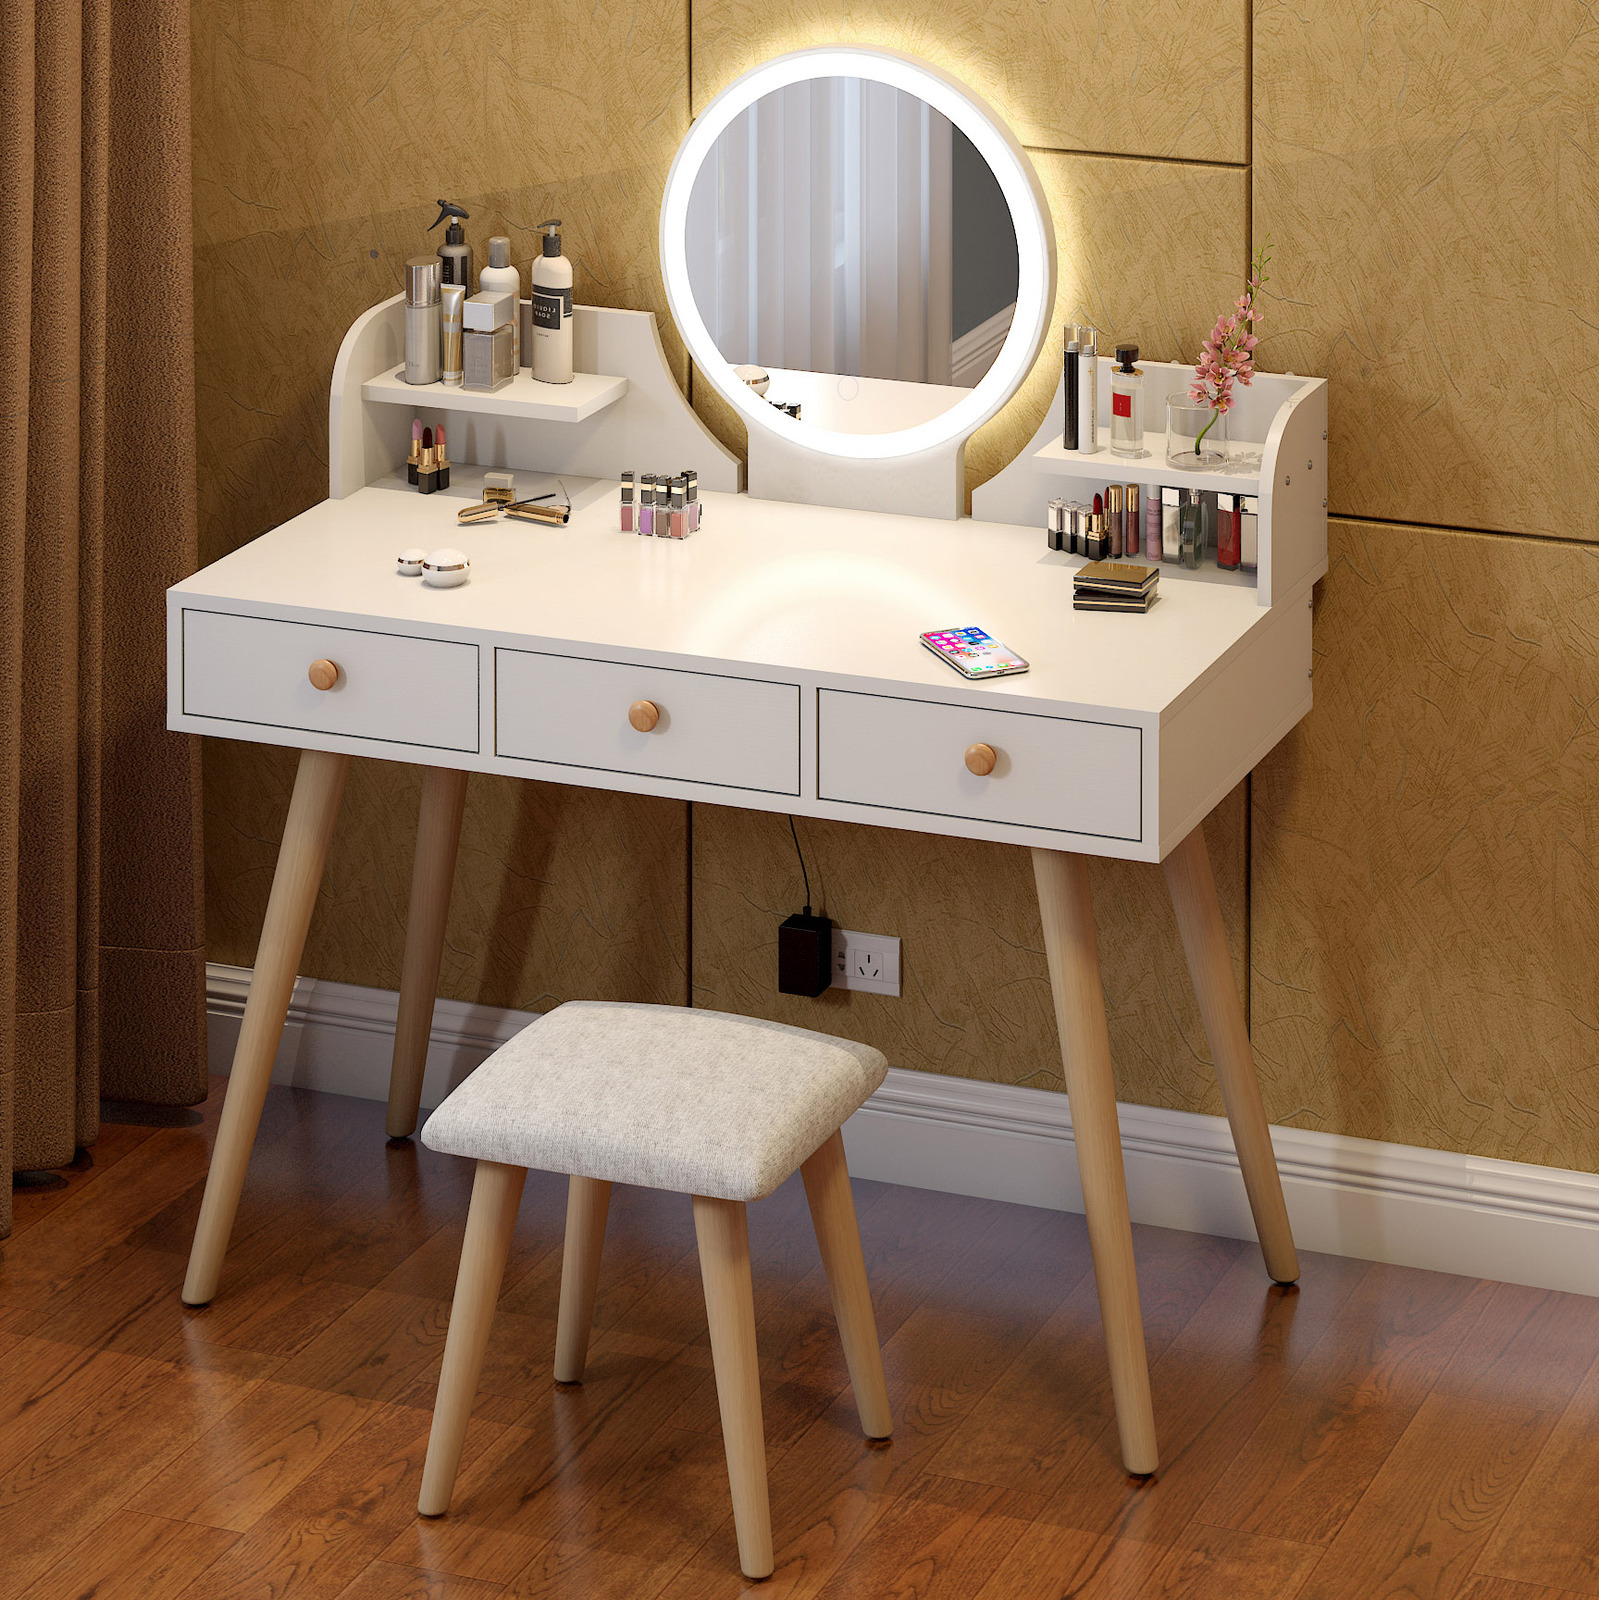 LED Luminous Queen Large Dresser Vanity Table with Mirror, Stool and Storage Drawers Set